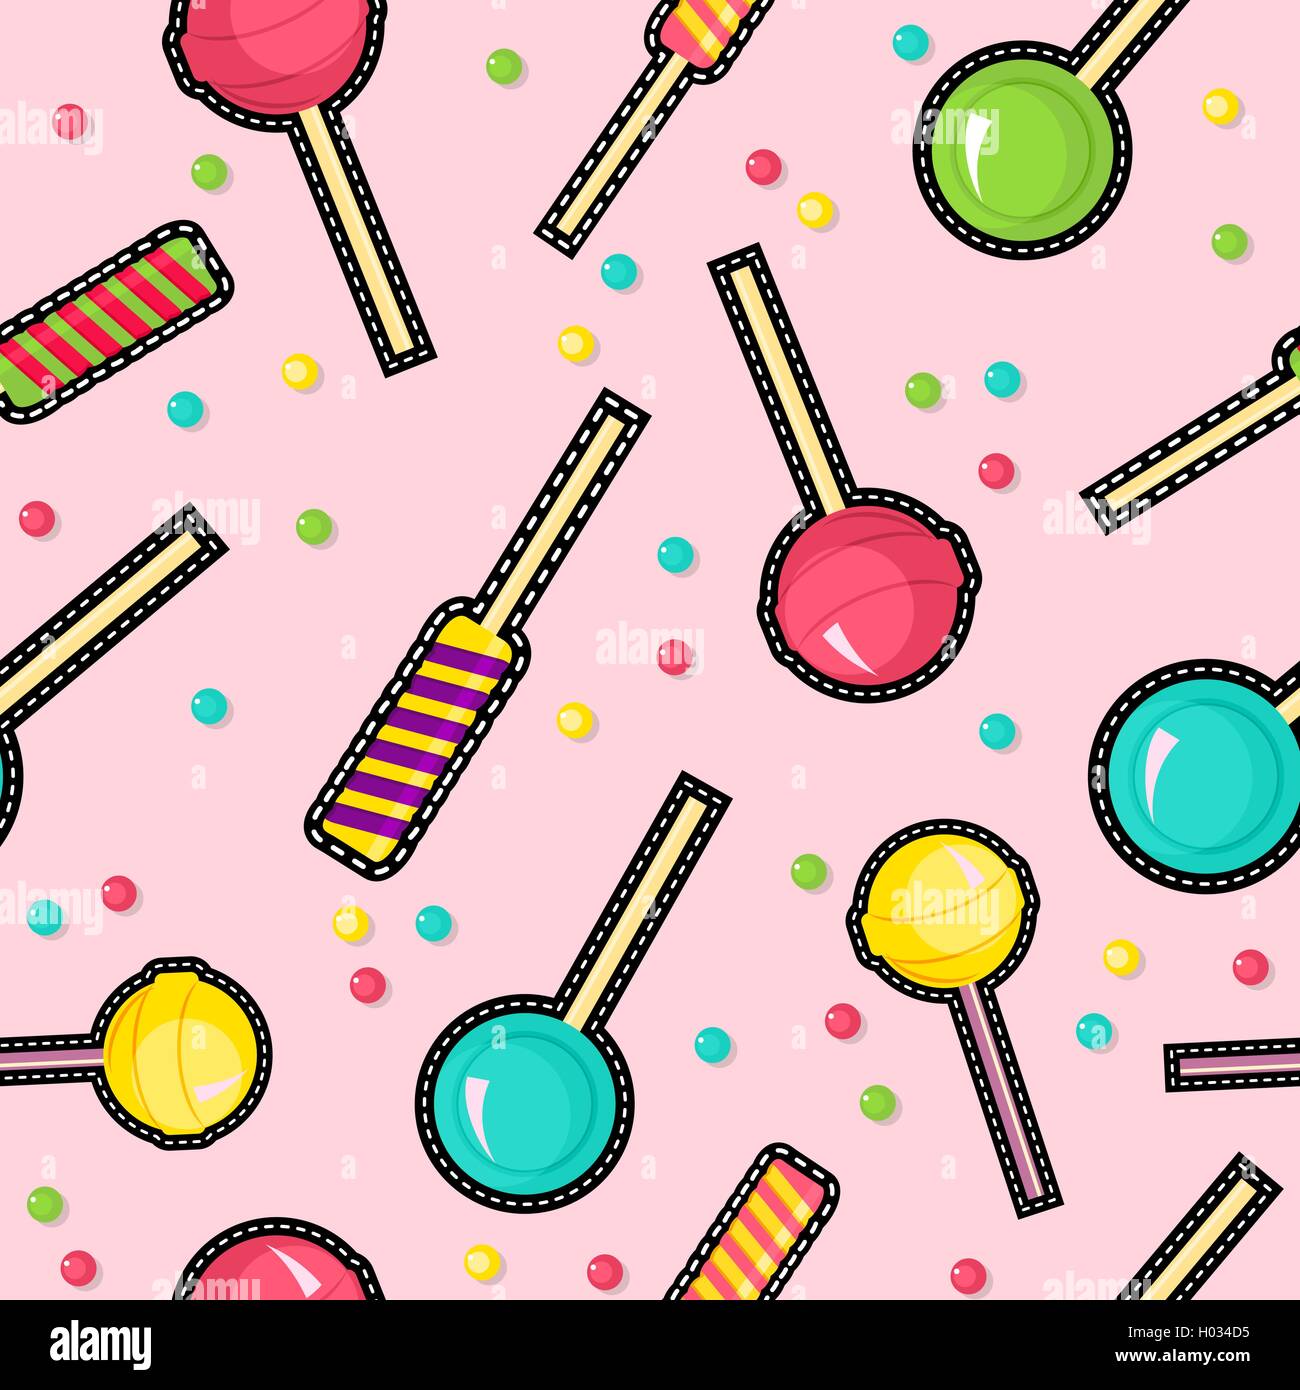 Cute seamless pattern with lollipop candy stitch patch icons, dessert and sugar pink illustration background. EPS10 vector. Stock Vector